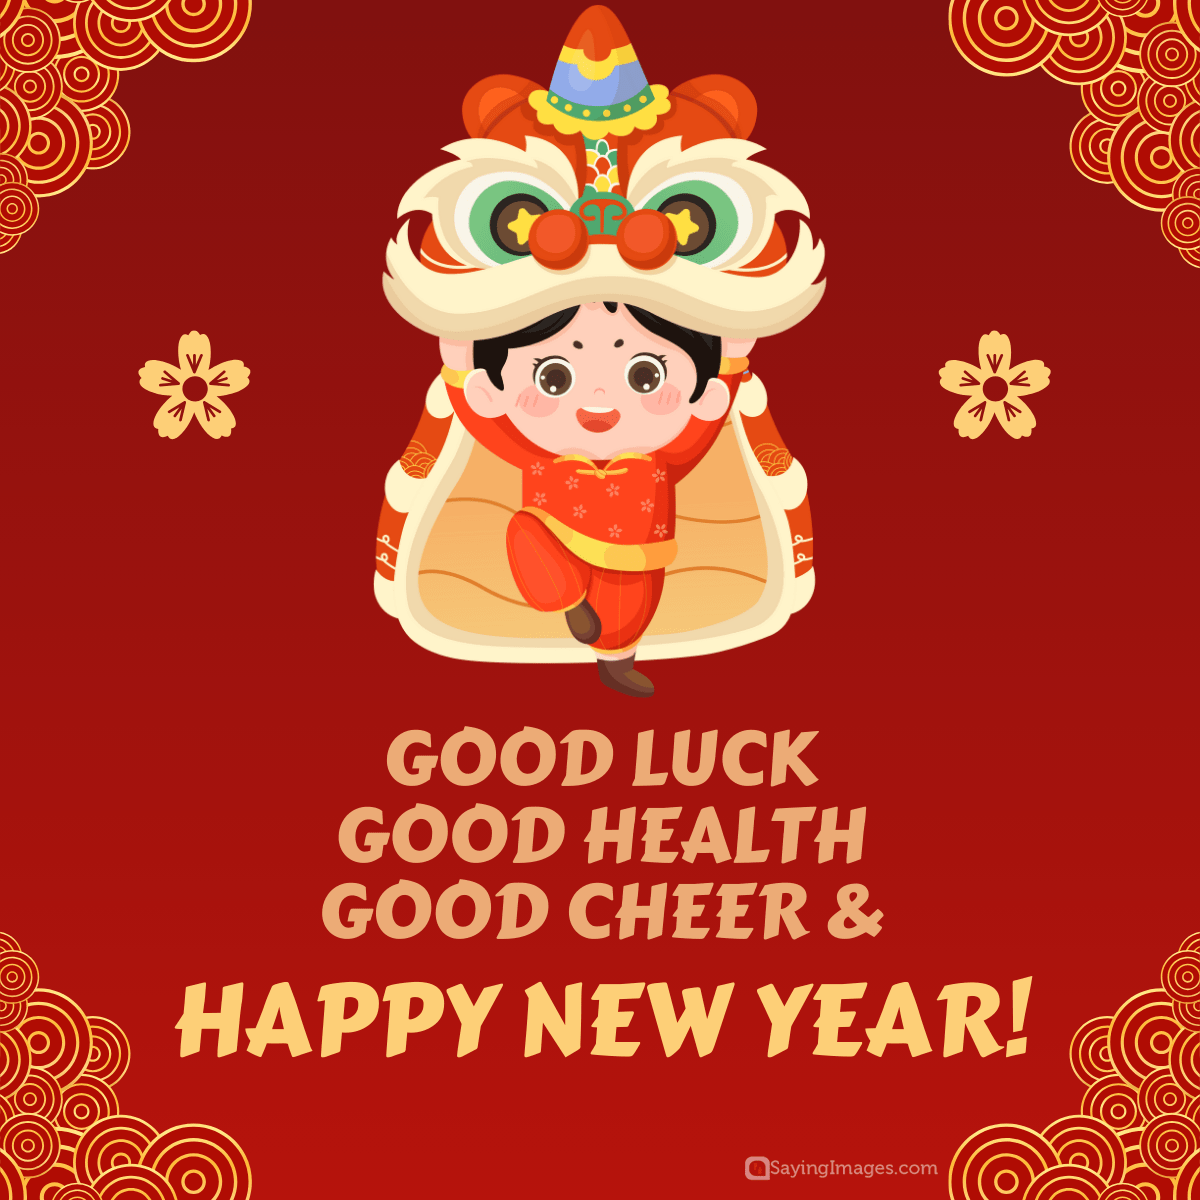 Good luck, good health, good cheer and Happy New Year! 